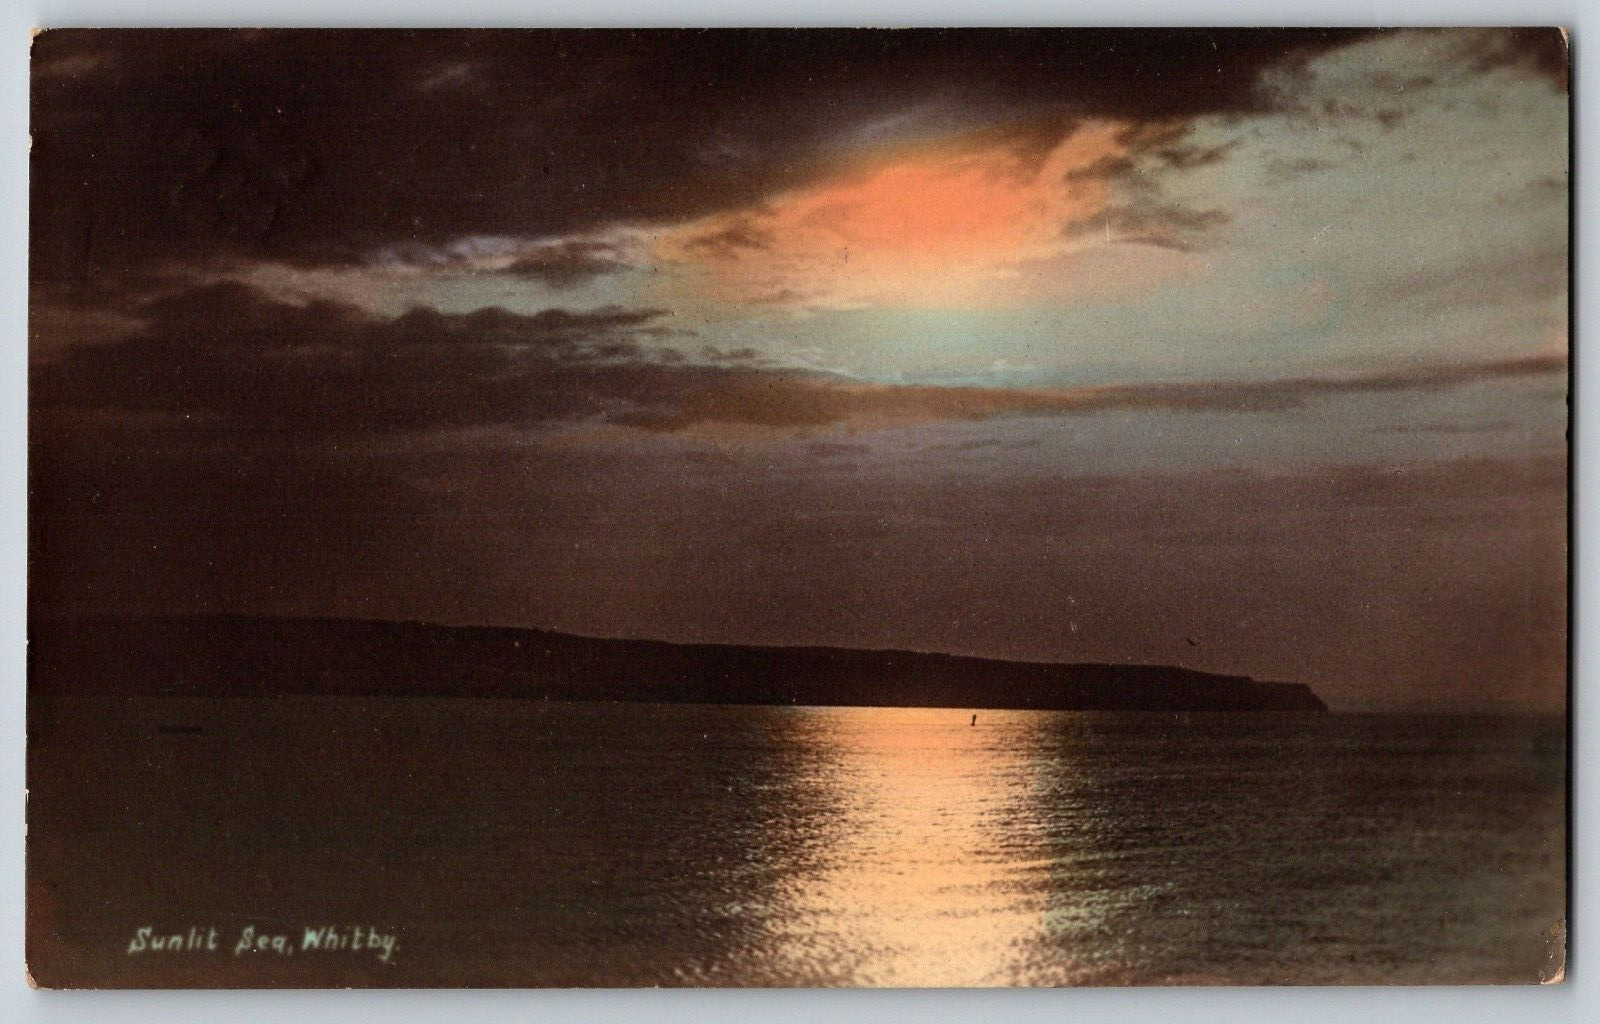 Whitby, North Yorkshire - Colored RPPC Sunlit Sea - Vintage Postcard